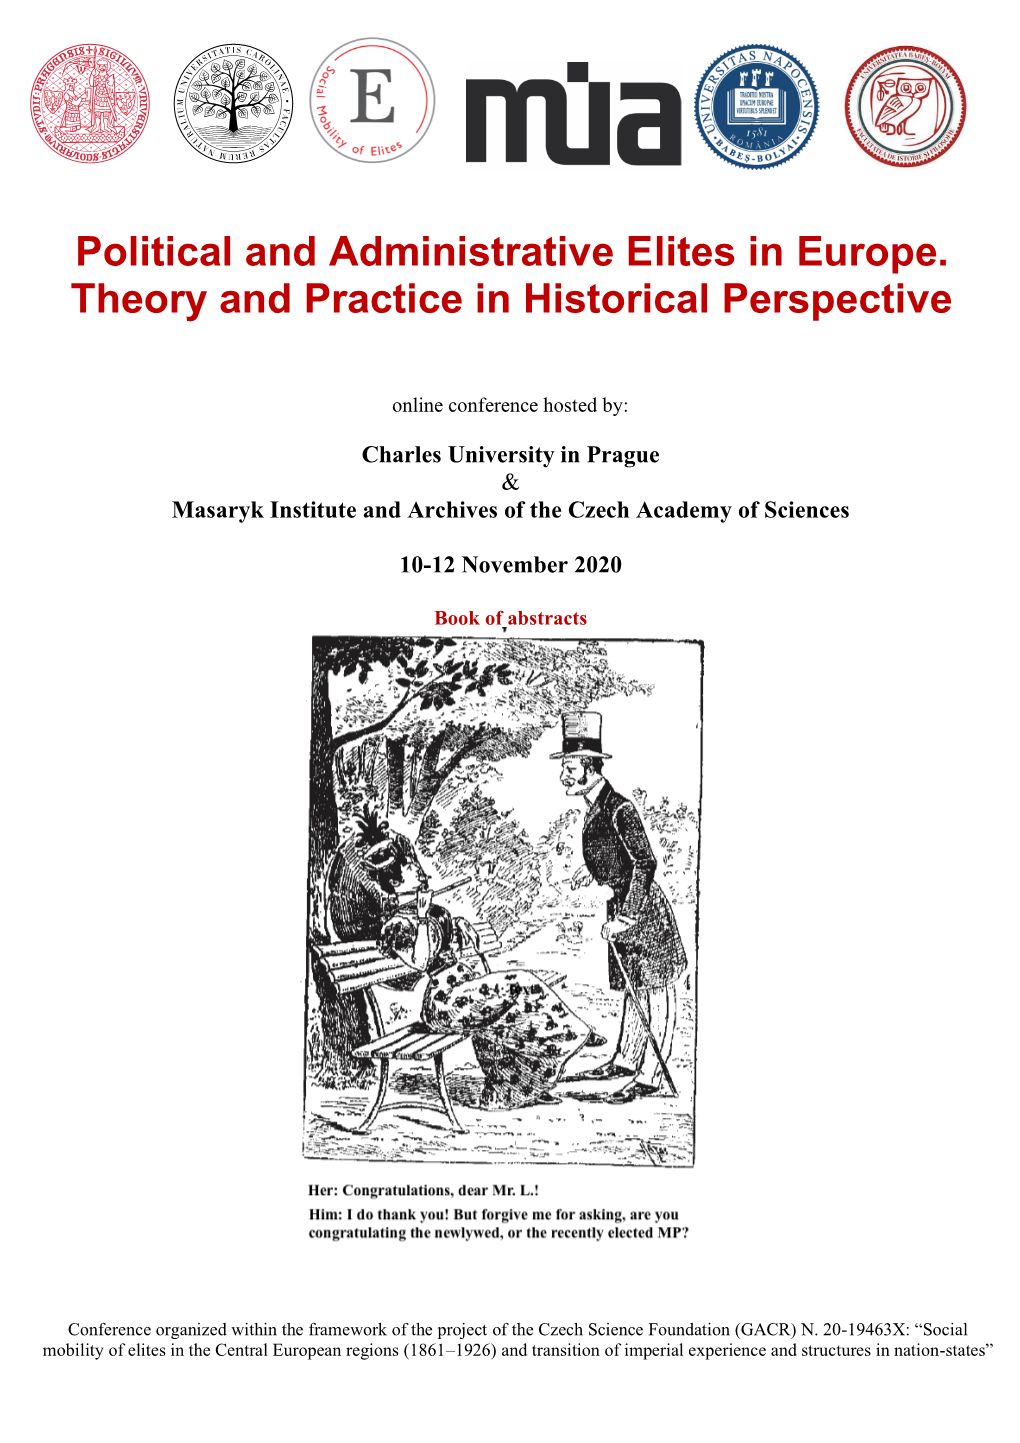 Political and Administrative Elites in Europe. Theory and Practice in Historical Perspective